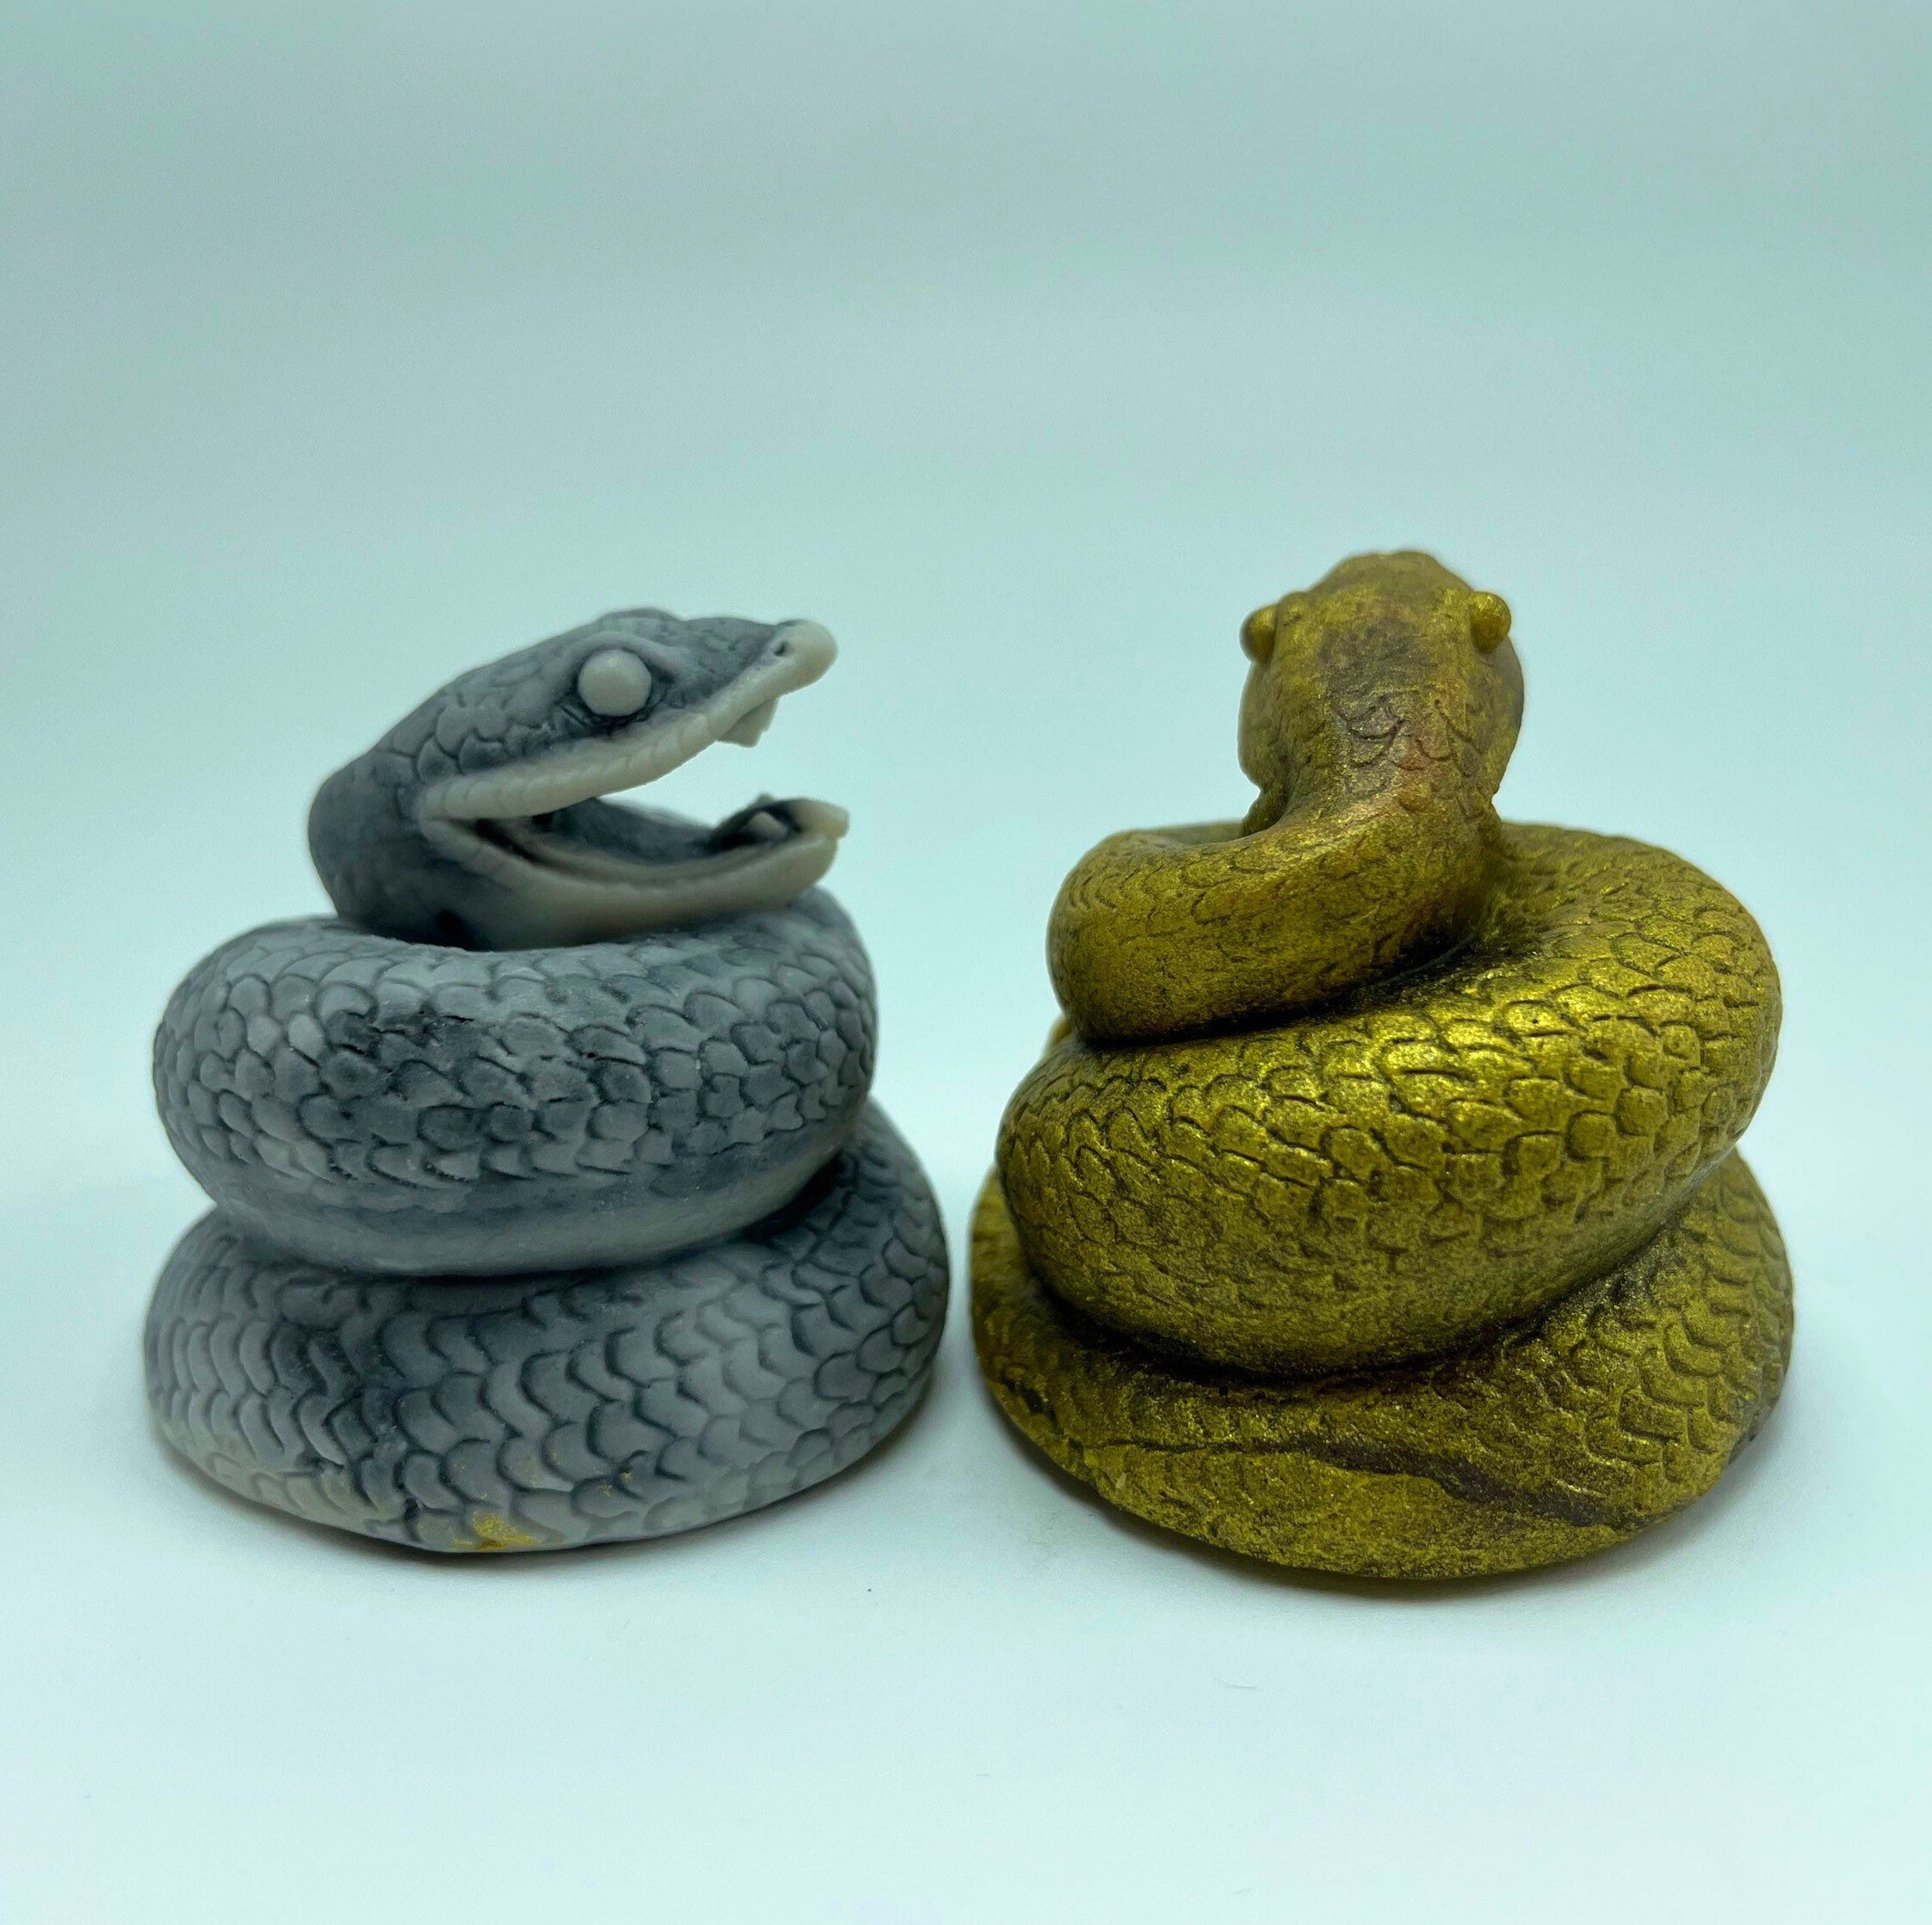 Cobra Candle Mold Snake Candle Mold Animal Mold Snake Resin Mold Clay Mold  Jewelry Resin Casting Mold Candle Making Molds Craft Supplies 3D Mold  Silicone Mold for Resin Casting Mold - Yahoo